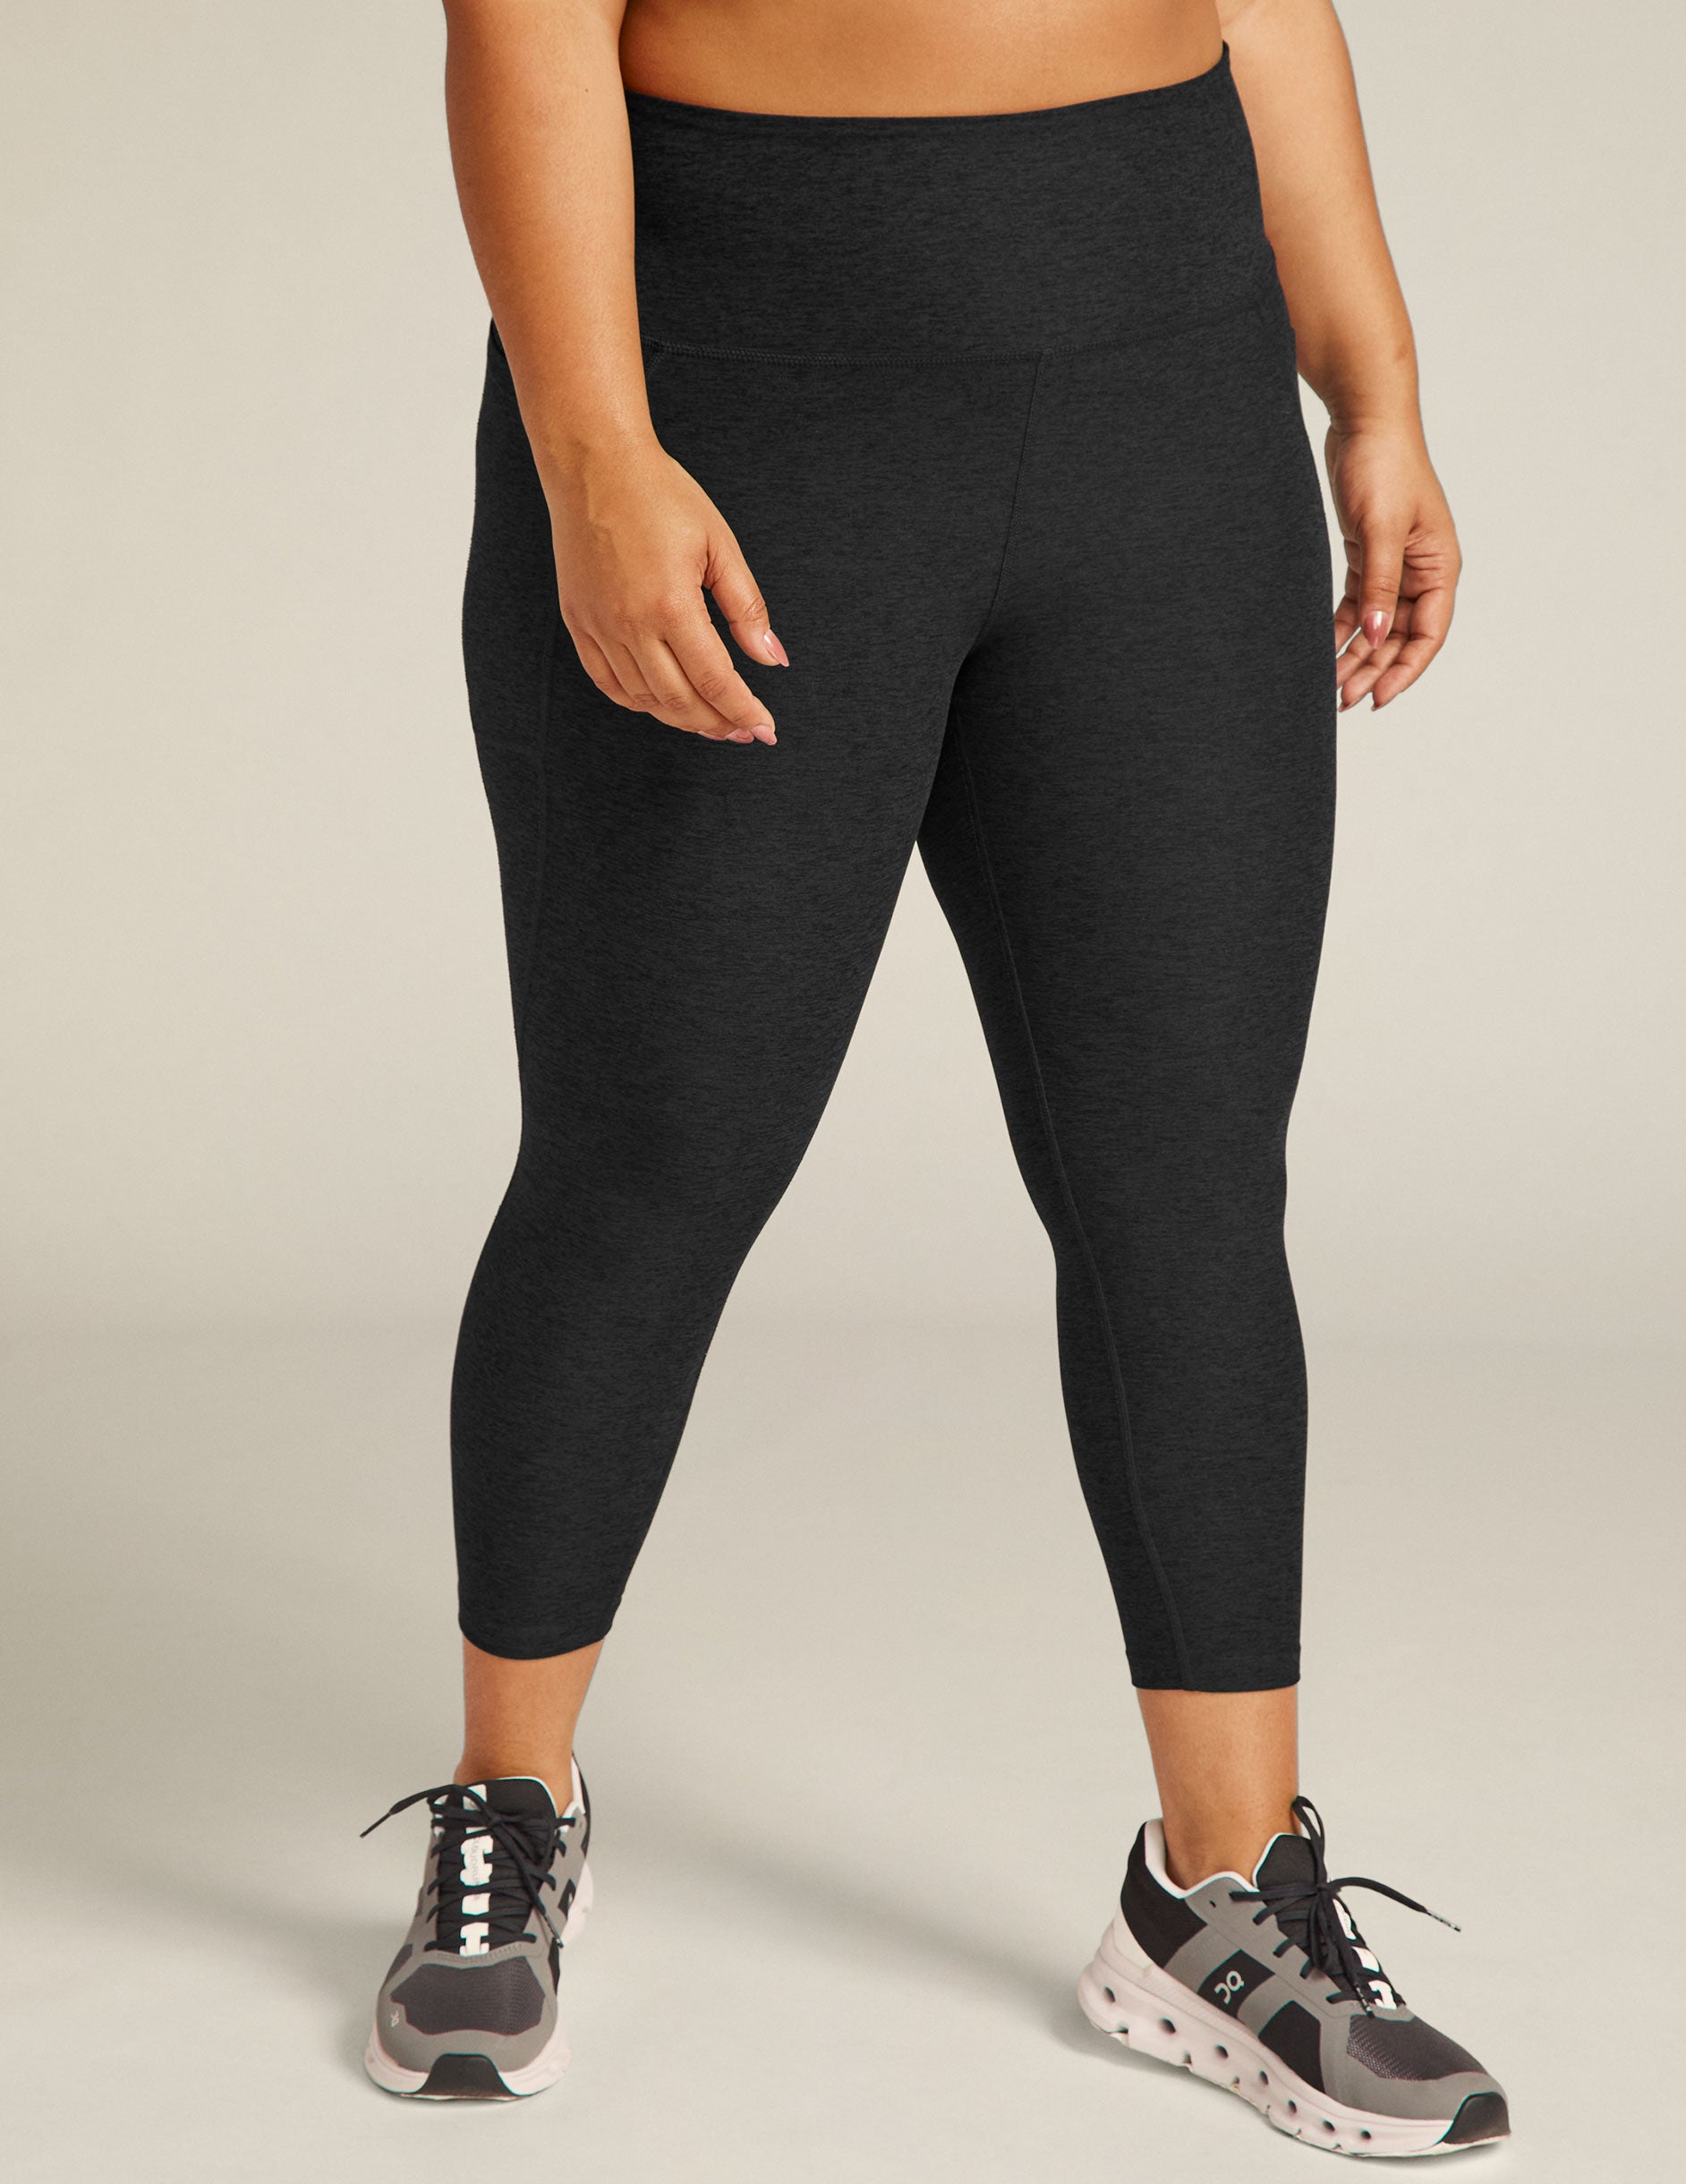 Beyond Yoga leggings size M Size M - $20 - From Carlos